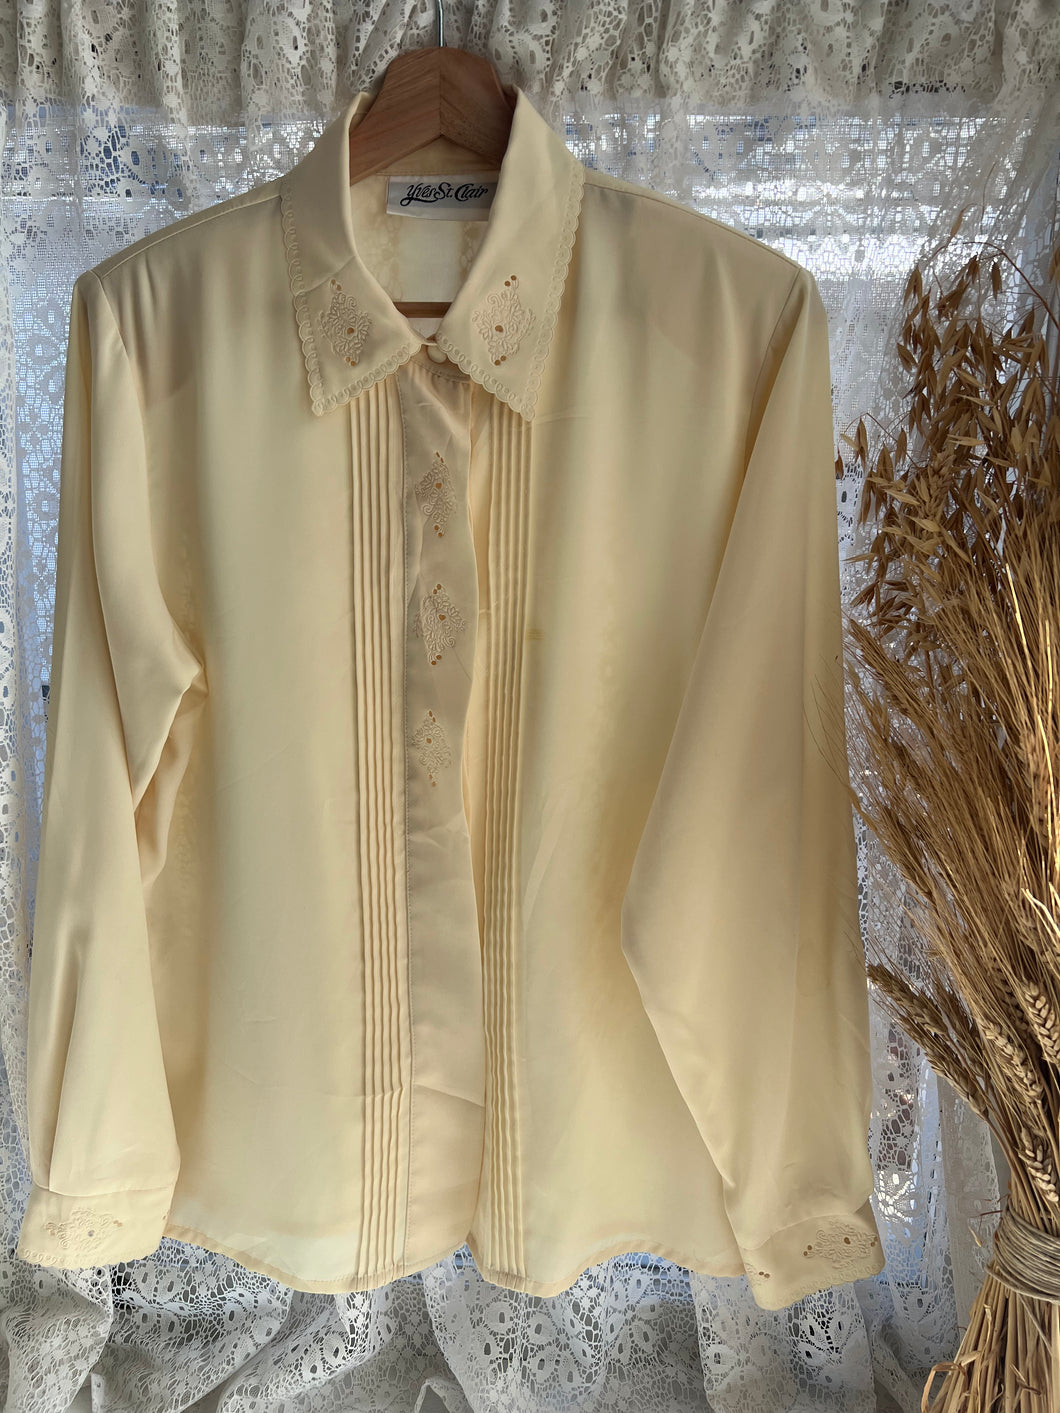 Vintage 80's Buttercup Yellow With Cut-Outs and Debossing (XL)